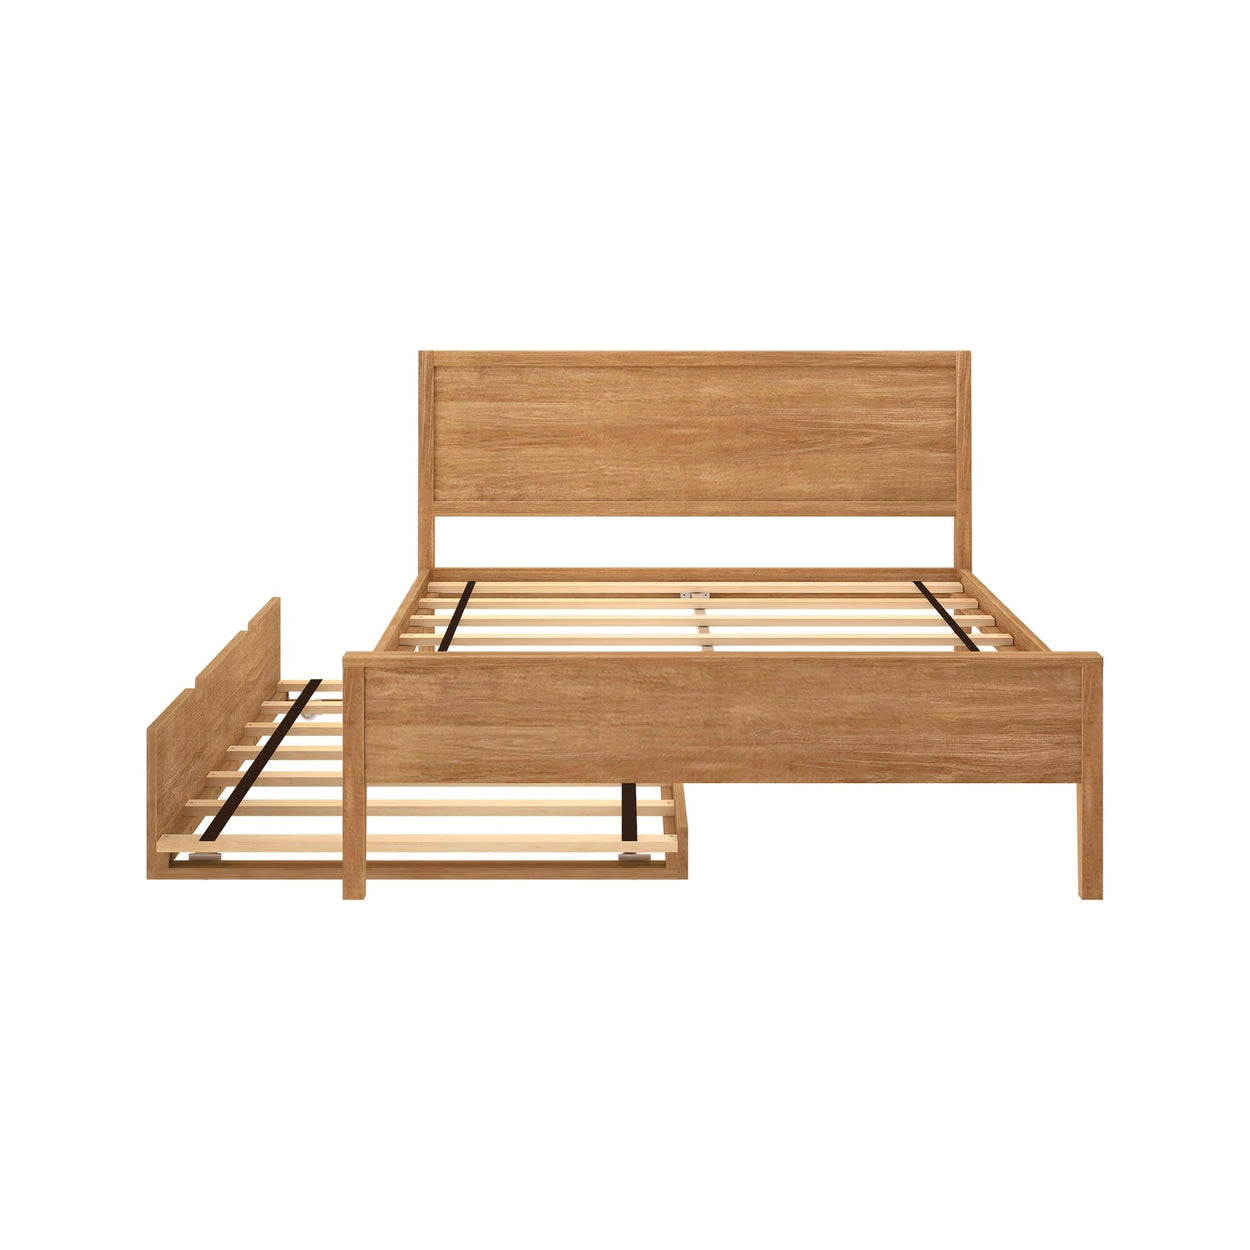 186101-007 : Kids Beds Classic Full-Size Bed with Panel Headboard and Trundle, Pecan